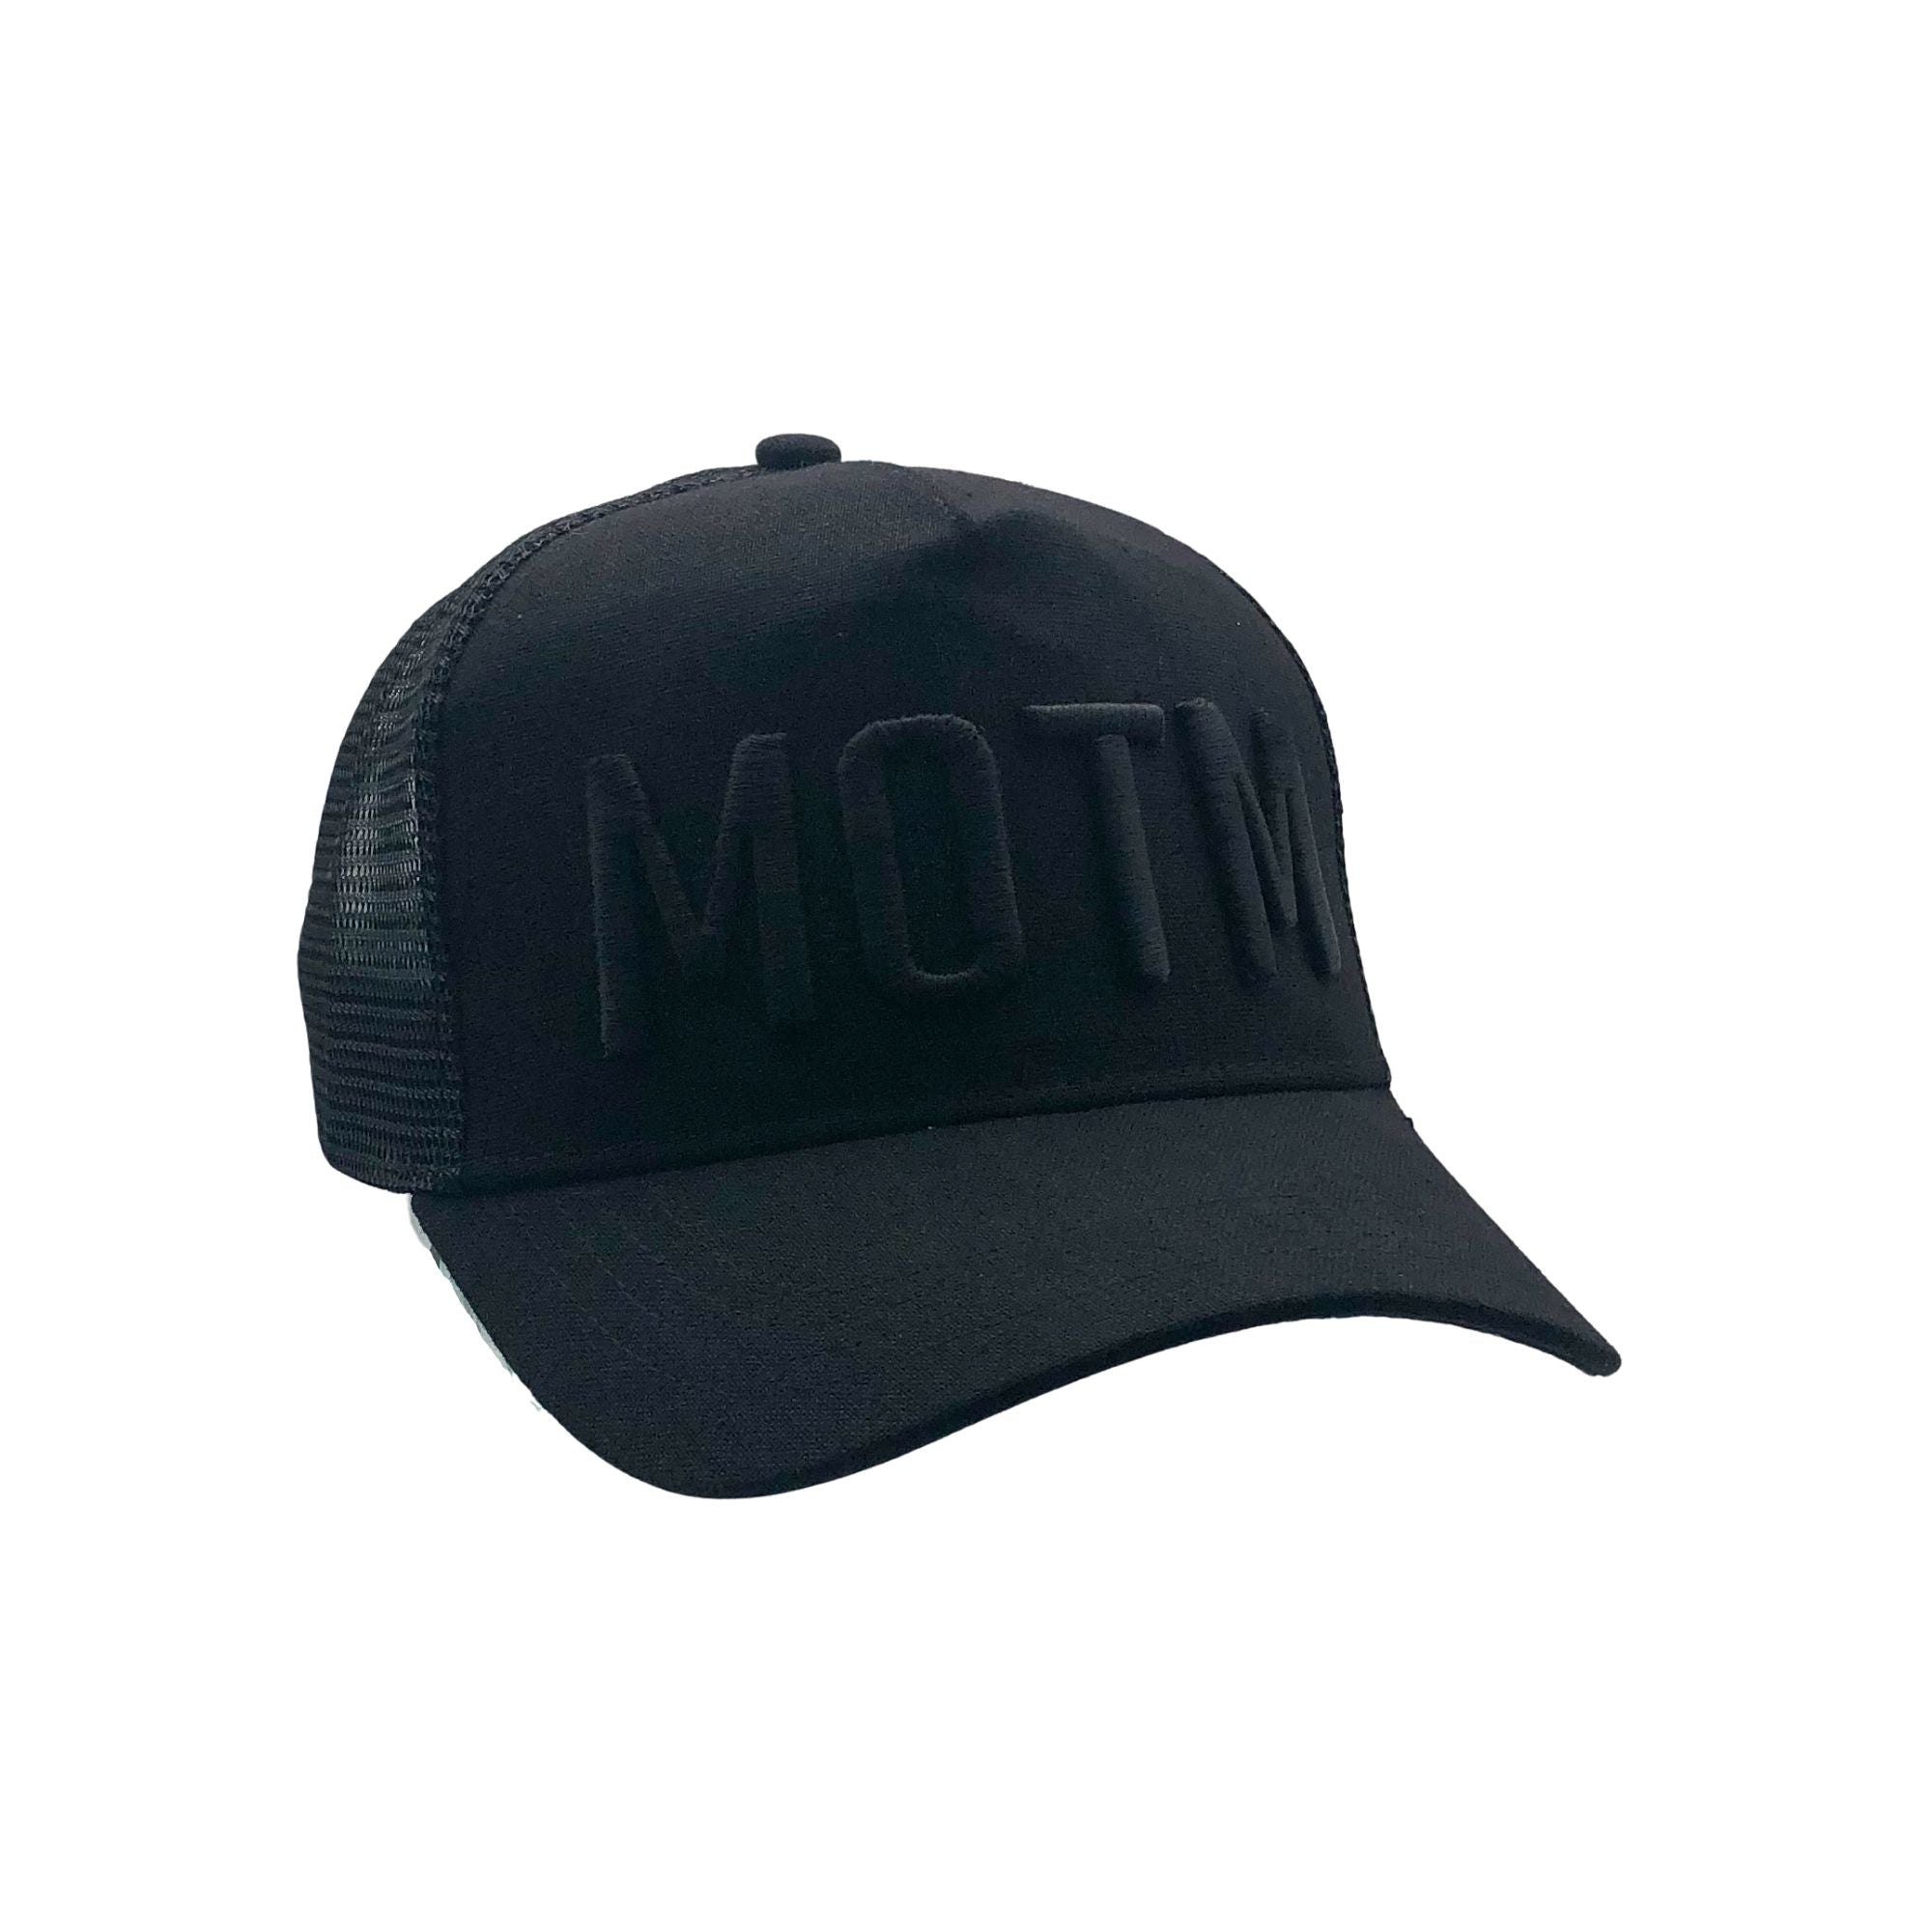 Official Embroidered MAN OF MATCH® Carlos 3D Bl MOTM THE Roberto Cap -